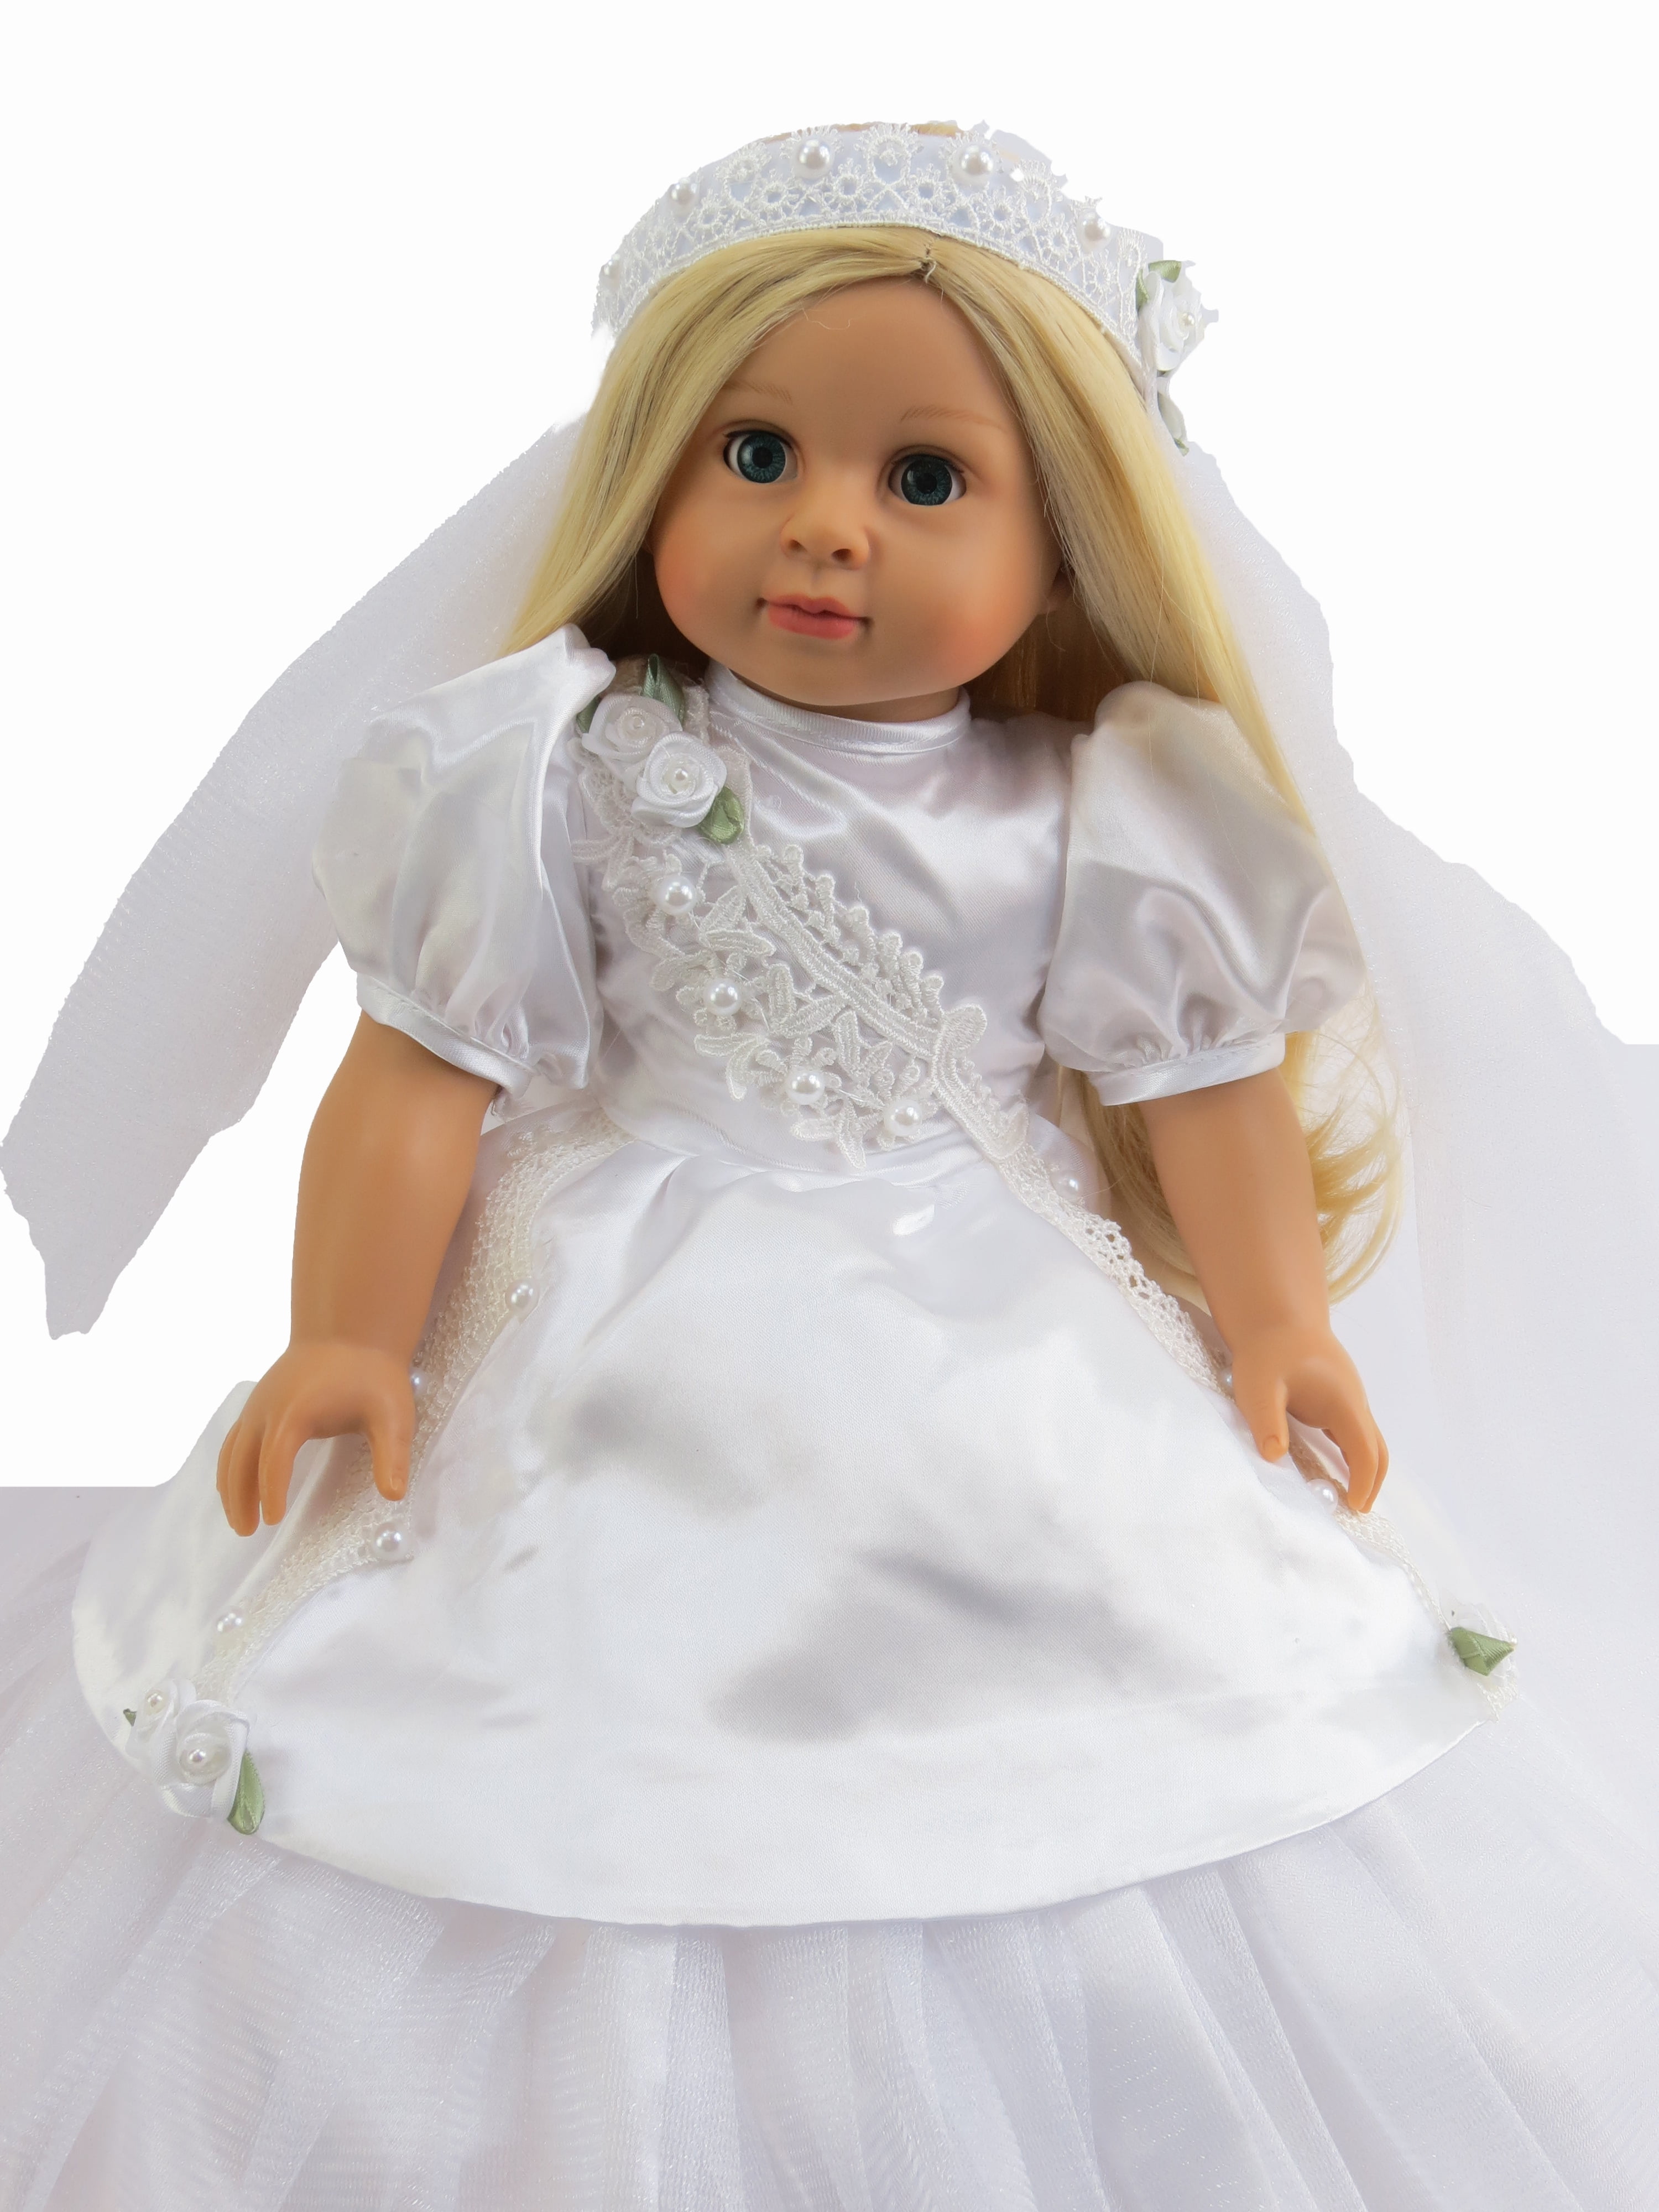 Wedding Communion Gown with Flowers & Veil fits 18" American Girl Doll Clothes